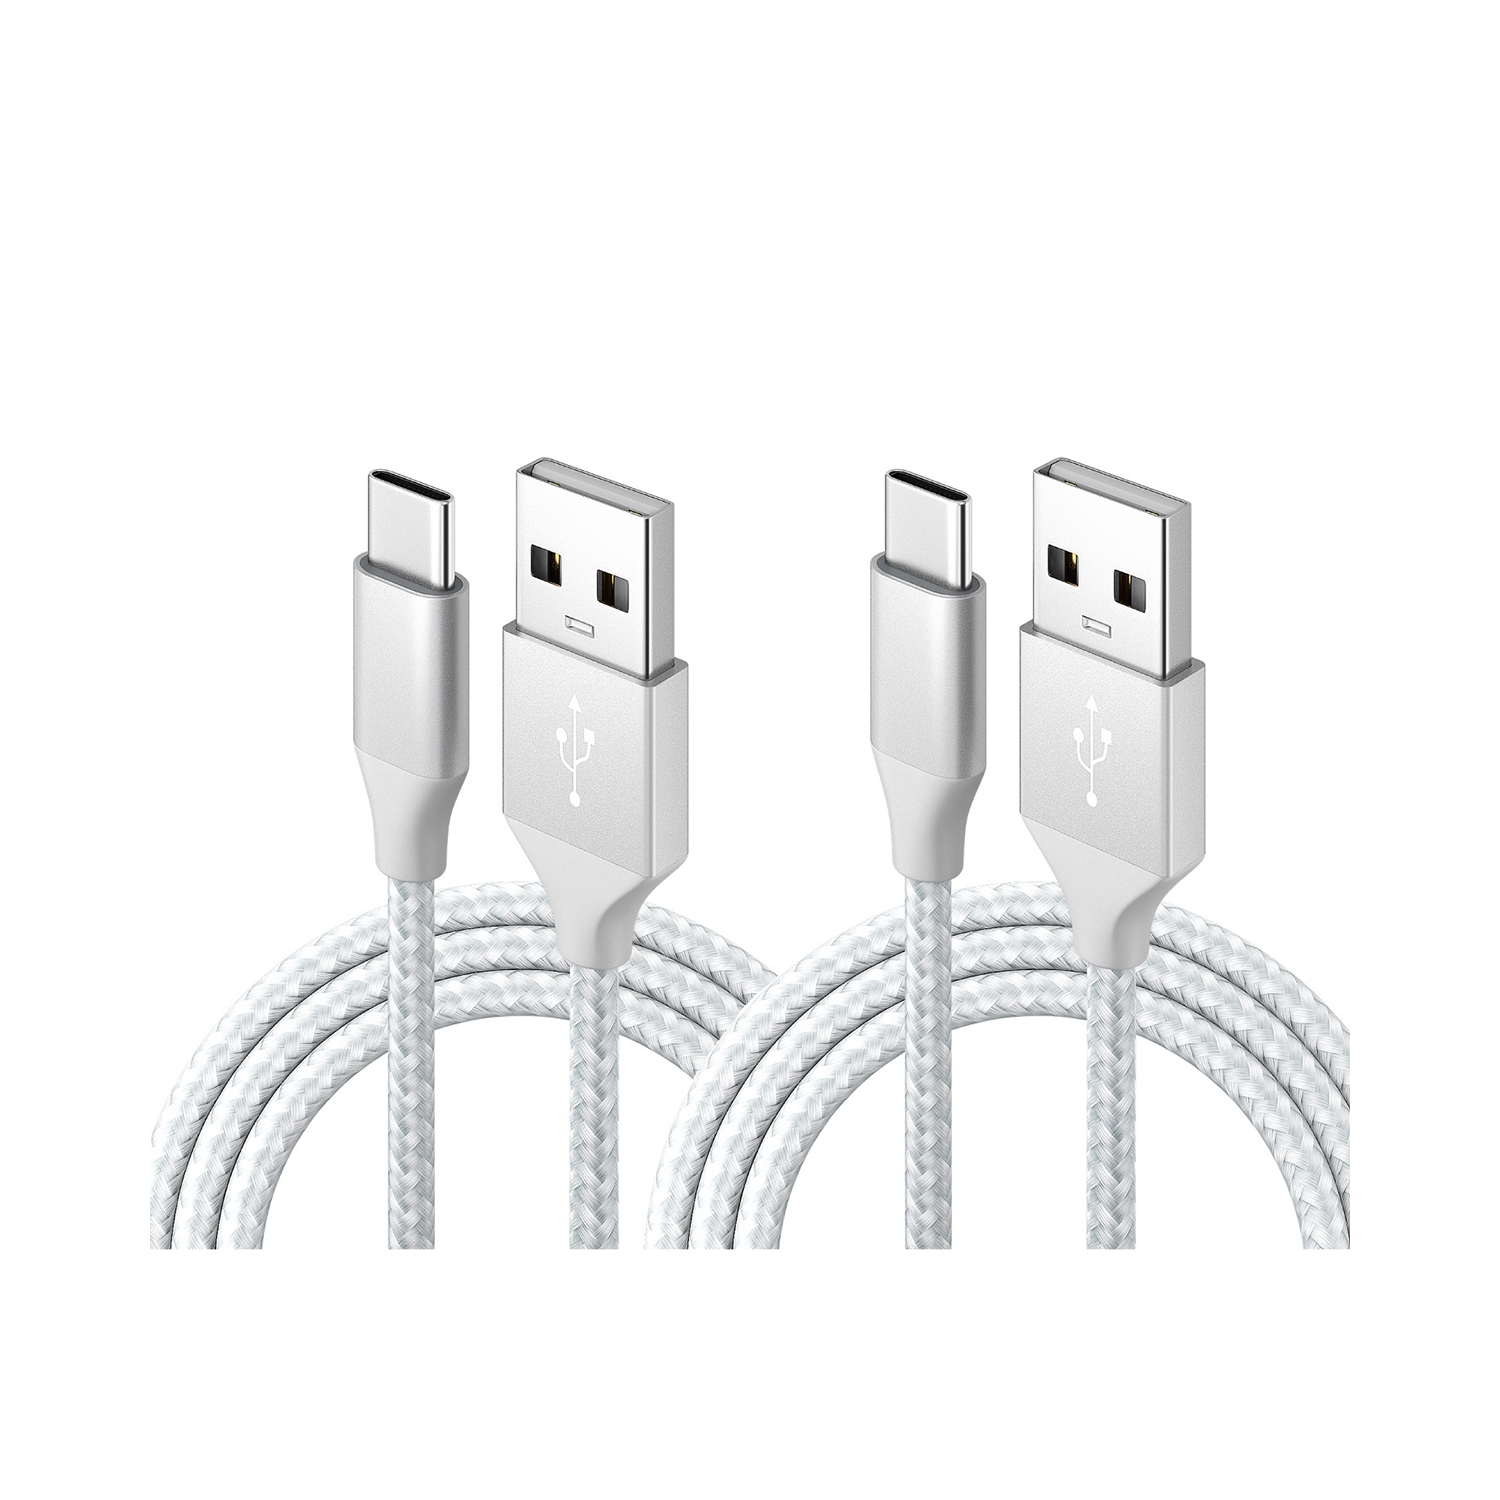 navor 2-Pack 10FT USB Type-C Charging Cable Compatible with Samsung Galaxy S10/S10 Plus/S9/Note 10/9/8/S8/S8+, Google Pixel, LG, Huawei, Motorola Nylon Braided Fast Charging and Data Transfer Cord